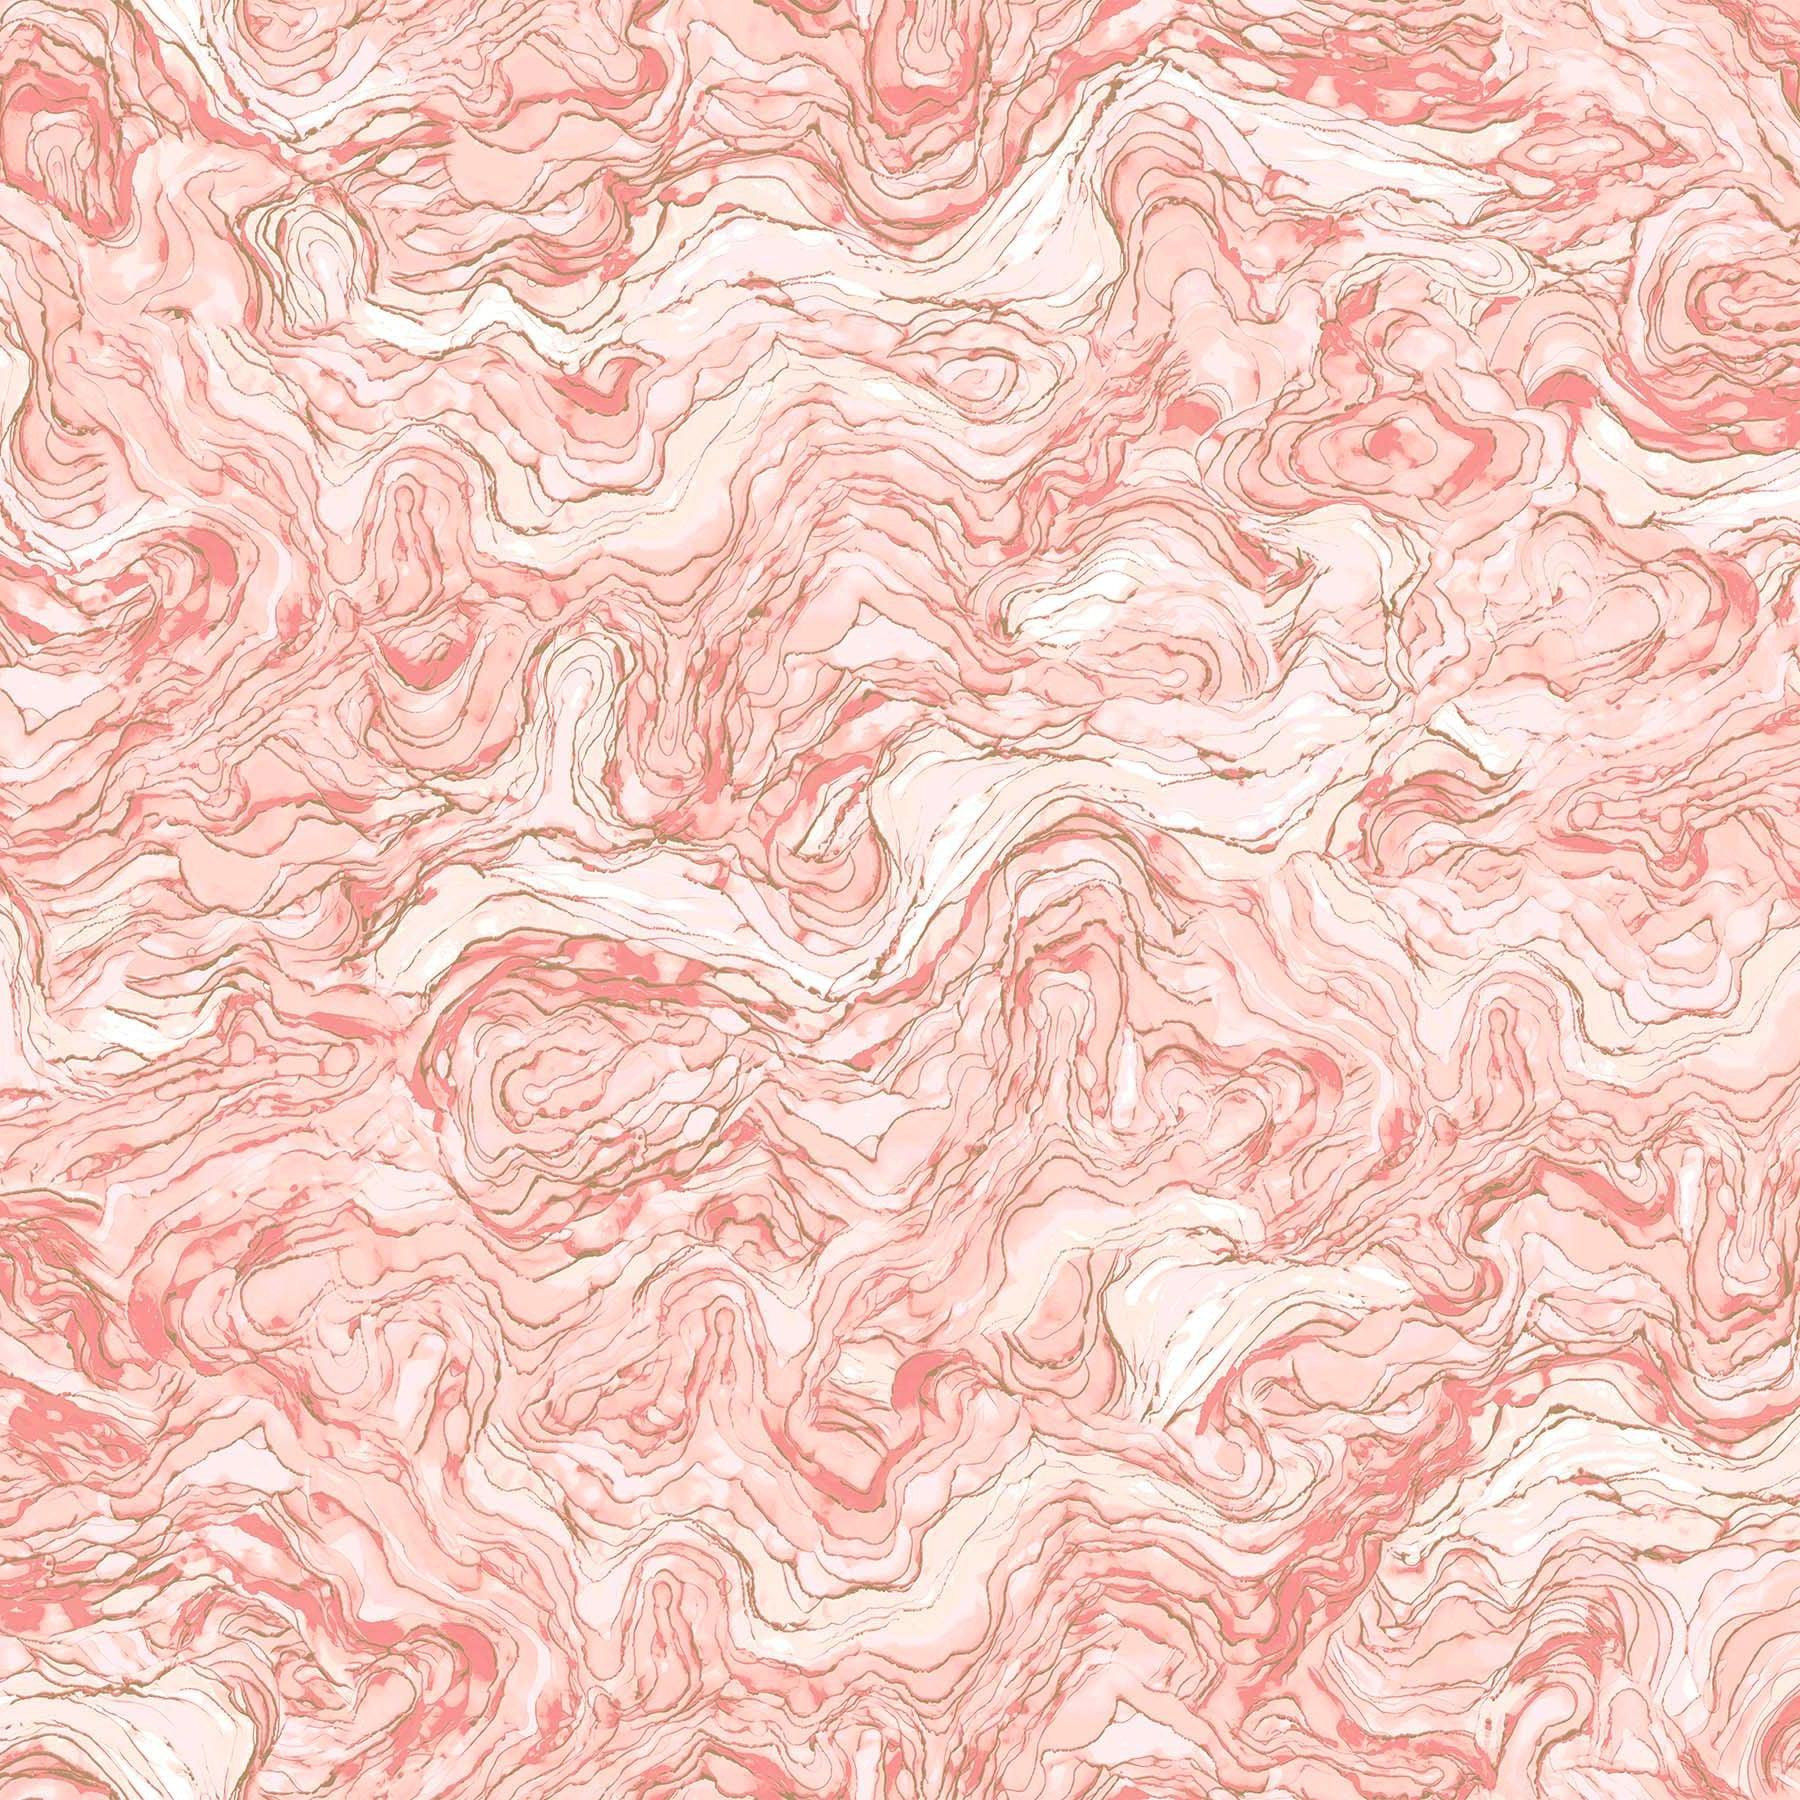 Midas Touch Coral Swirl Fabric